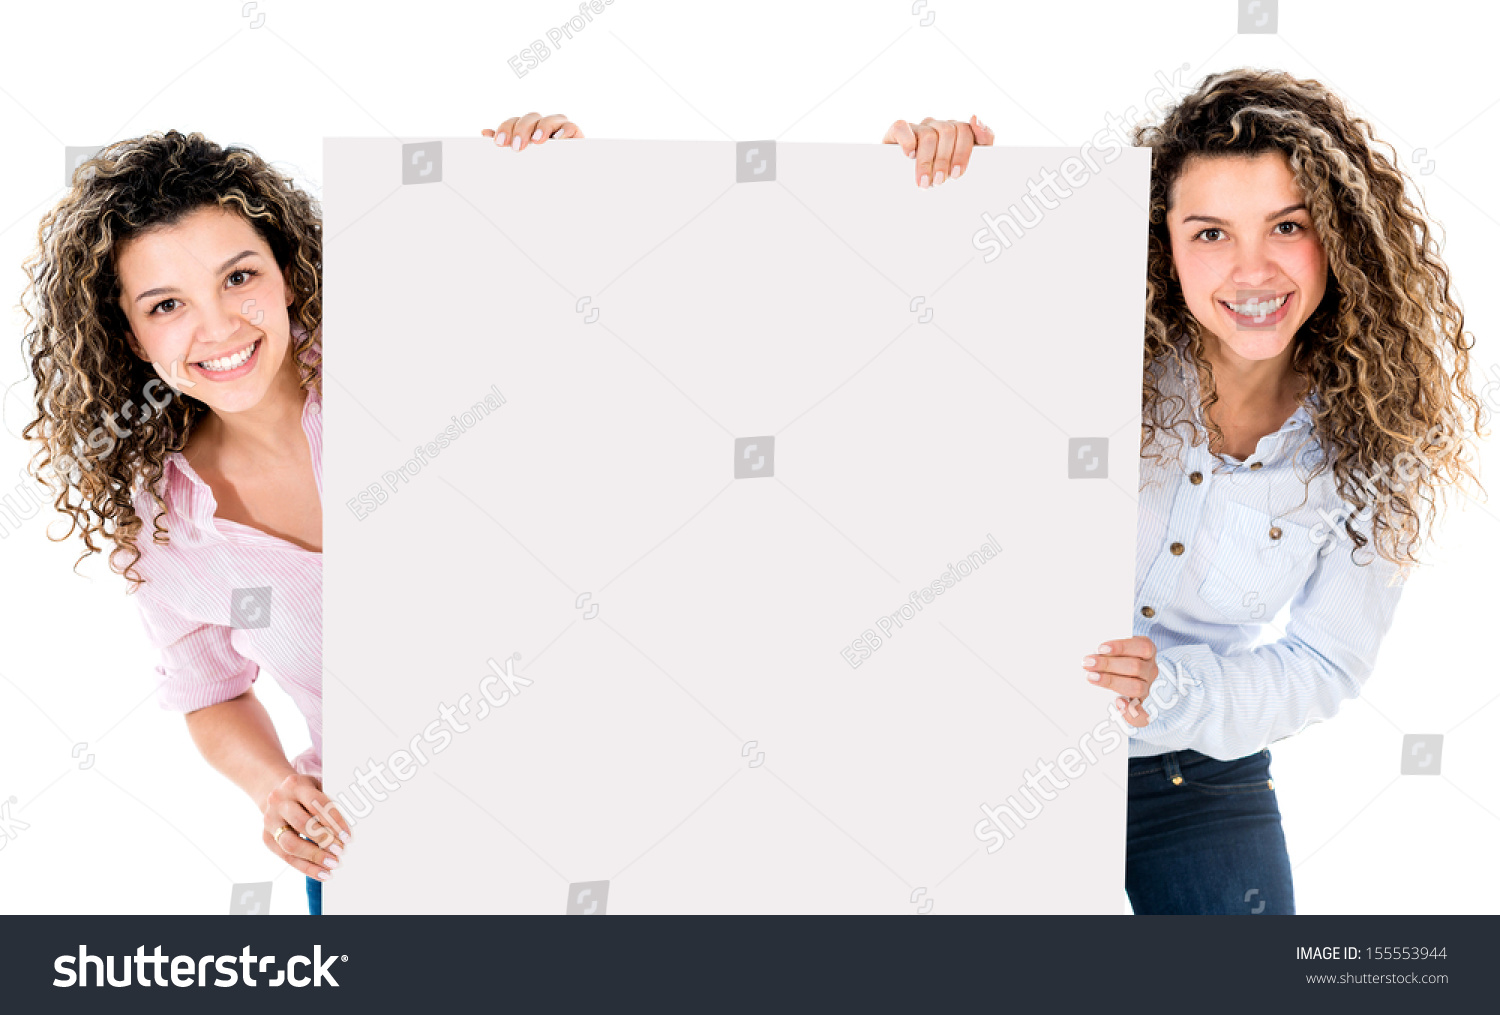 2,988 Curly Hair Twins Images, Stock Photos & Vectors | Shutterstock